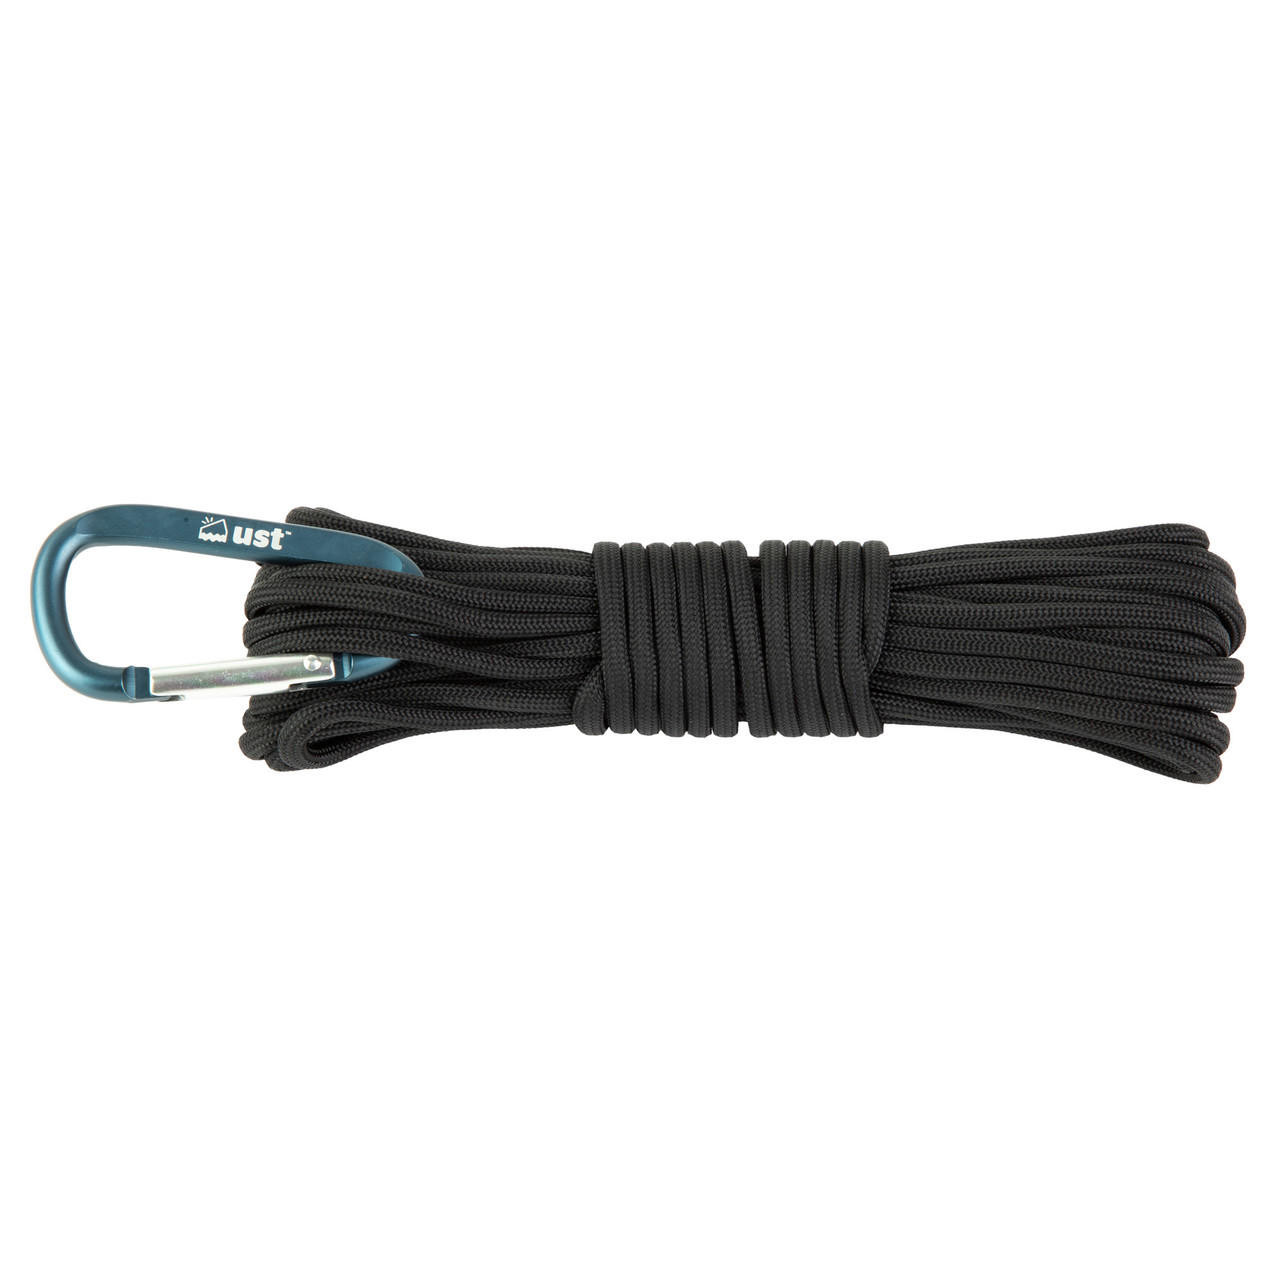 https://cdn11.bigcommerce.com/s-h424xqhs5x/images/stencil/1280x1280/products/2401/109111/ust-ultimate-survival-technologies-ust-30-foot-paracord-with-550lb-hank-heavy-duty-nylon-construction-and-carabiner-for-emergency-hiking-camping-backpacking-or-outdoor-survival__65111.1682509060.jpg?c=1?imbypass=on